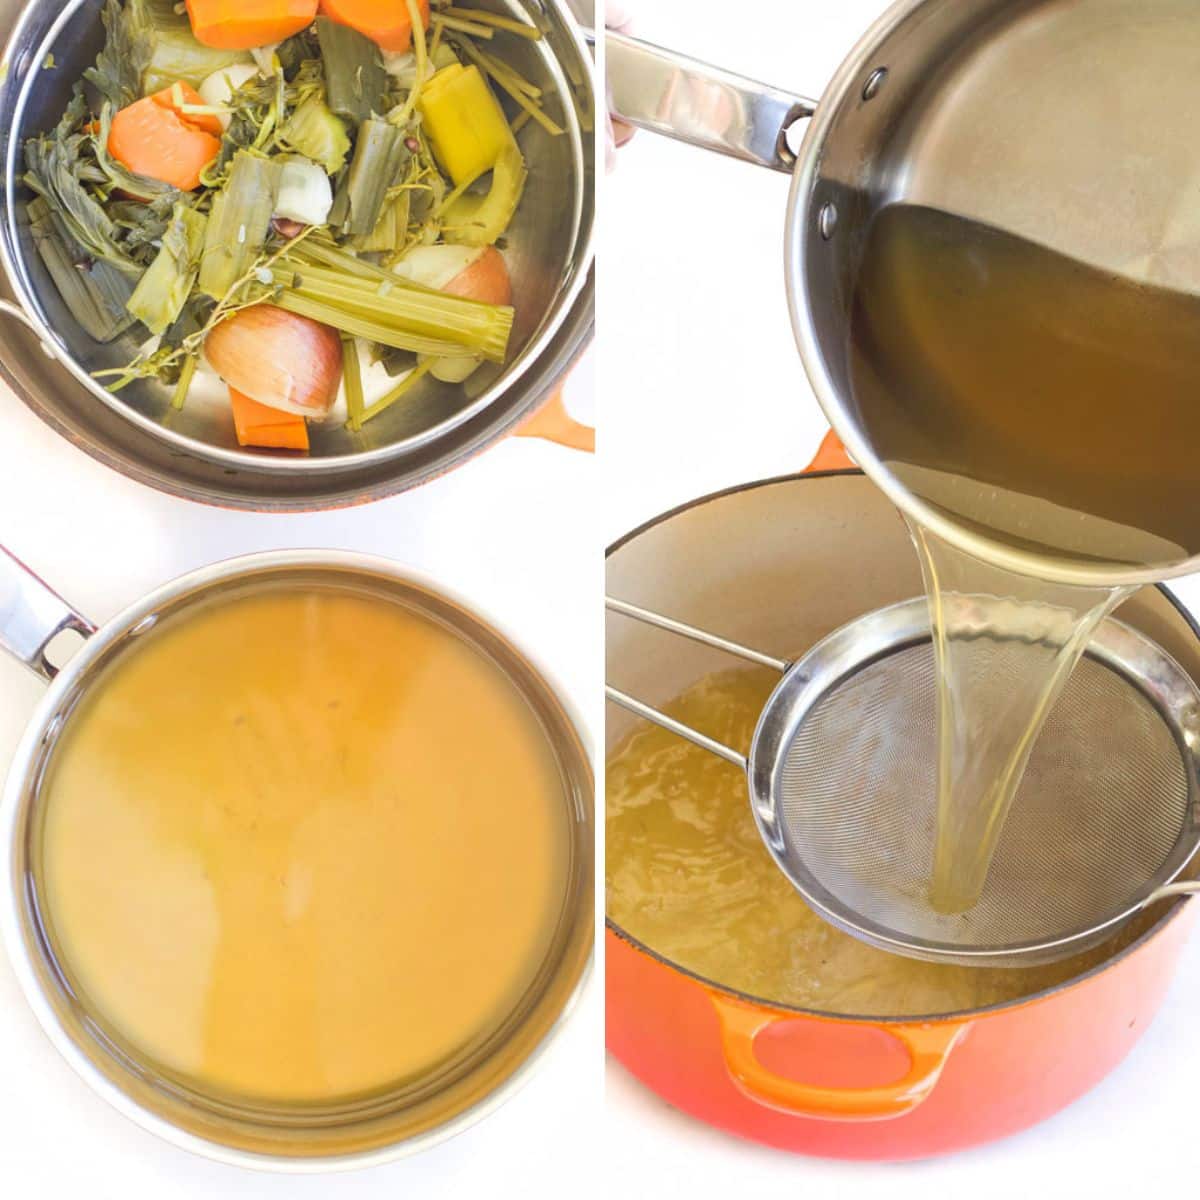 Collage of Two Images Showing How to Strain Vegetable Stock. First Images Shows Removing Large Vegetable Pieces Through Colander. Second Image Shows Liquid Then Passed Through Fine Mesh Sieve.